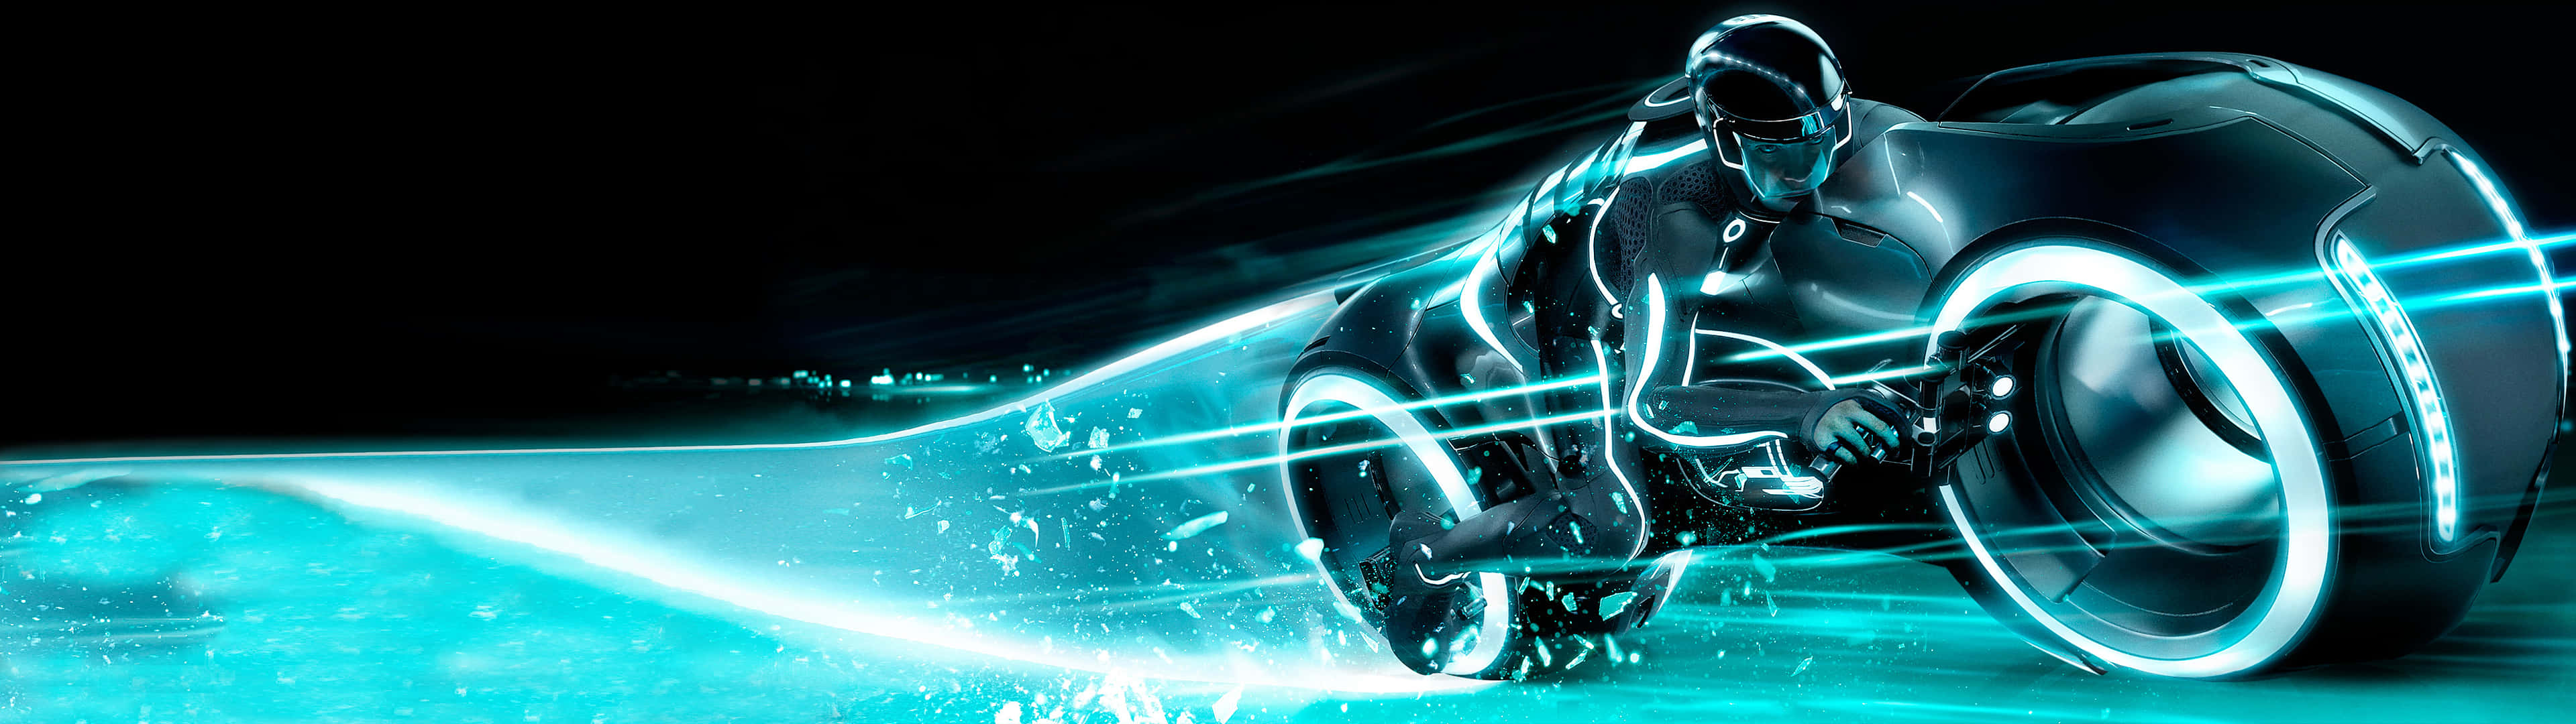 3840X1080 Light Cycle Picture